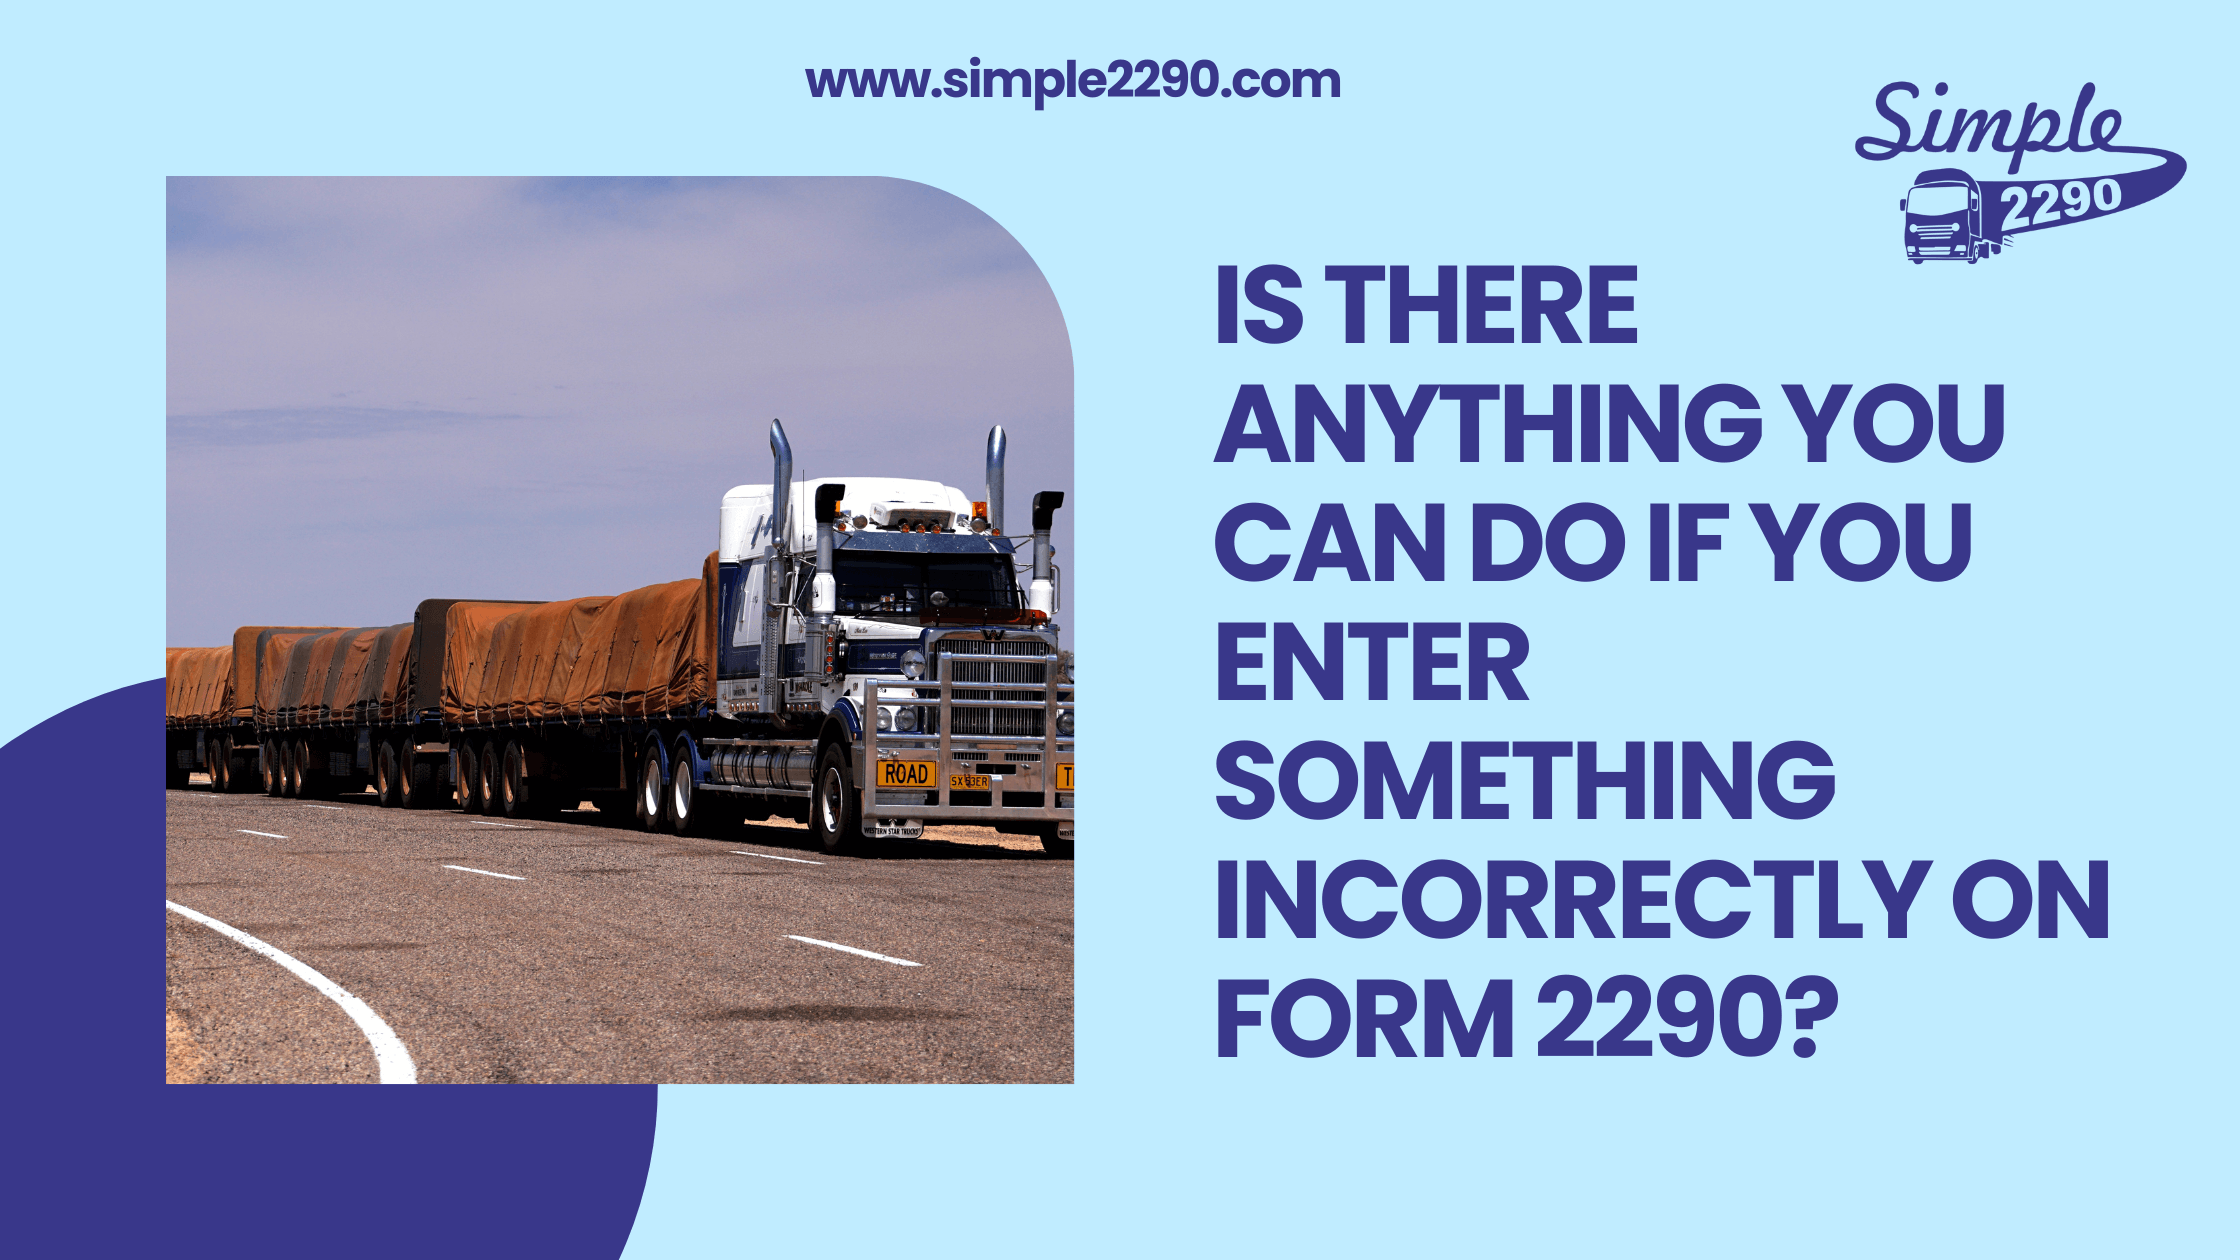 Is there anything you can do if you enter something incorrectly on Form 2290?